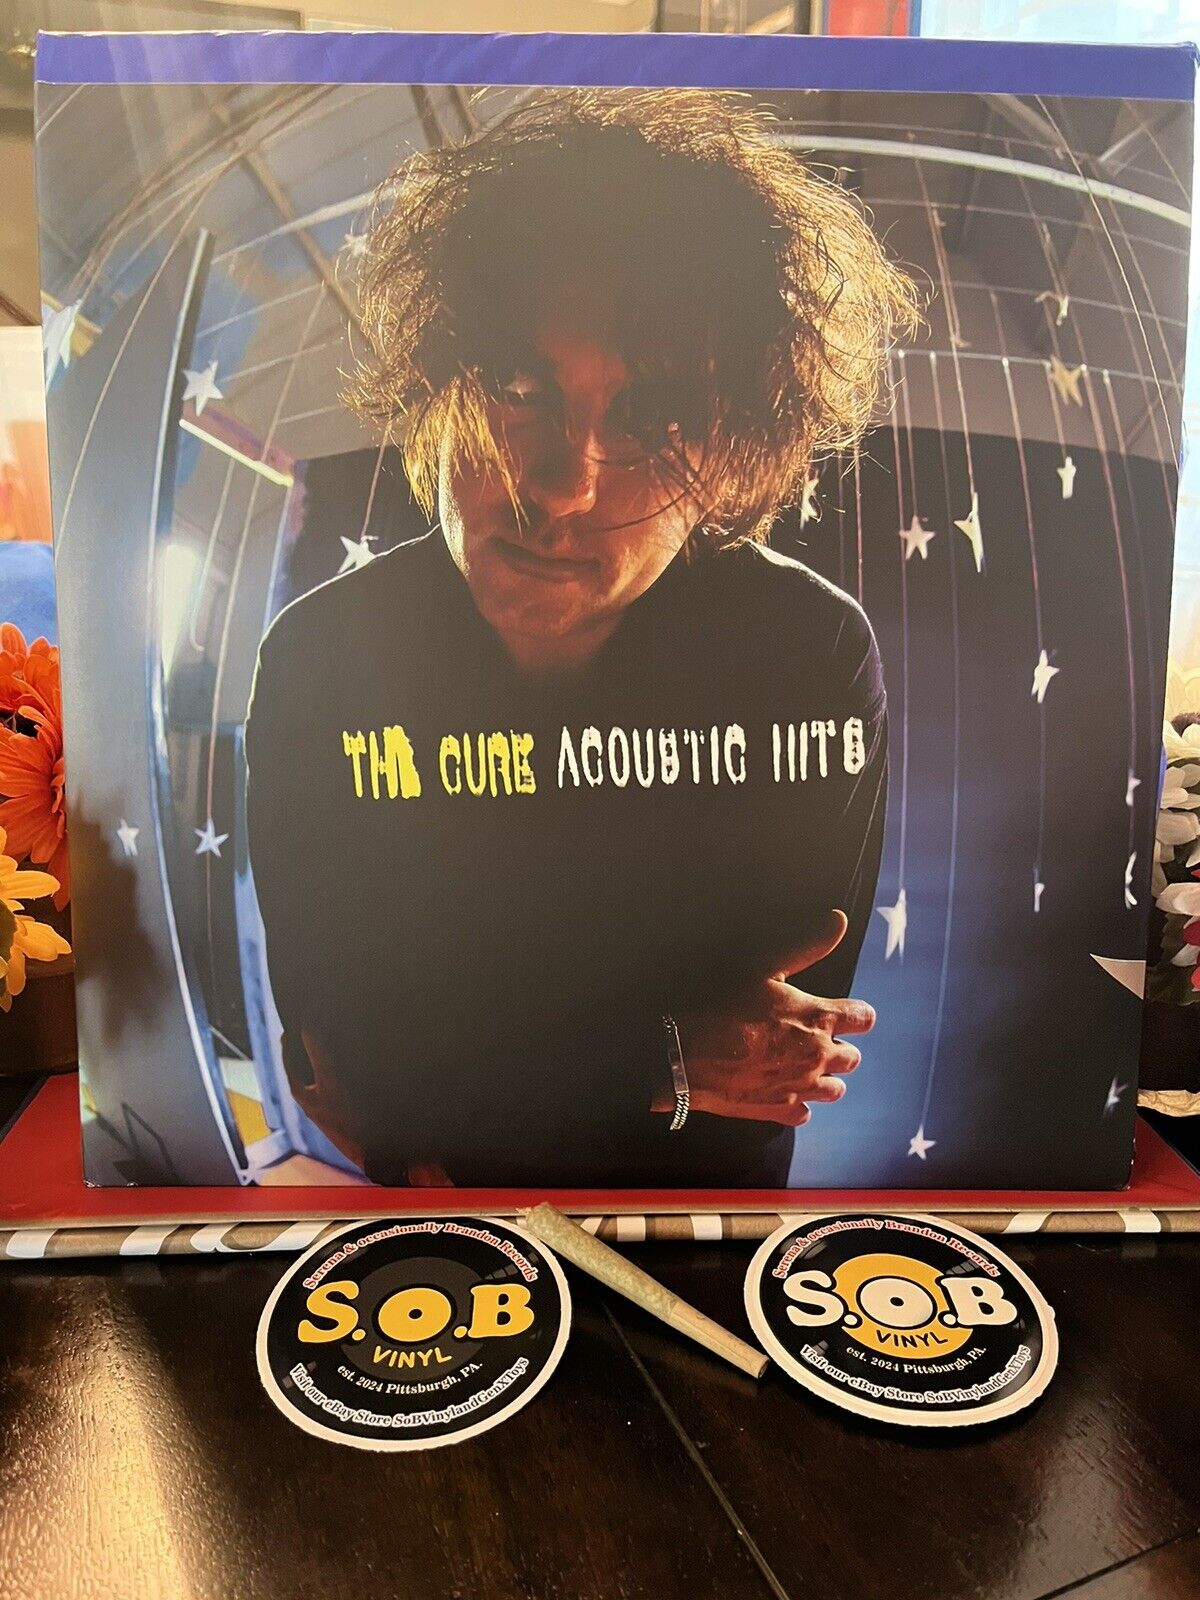 The Cure Accoustic Hits 2001 Vinyl 2LP Records r2017 USED EX / NM